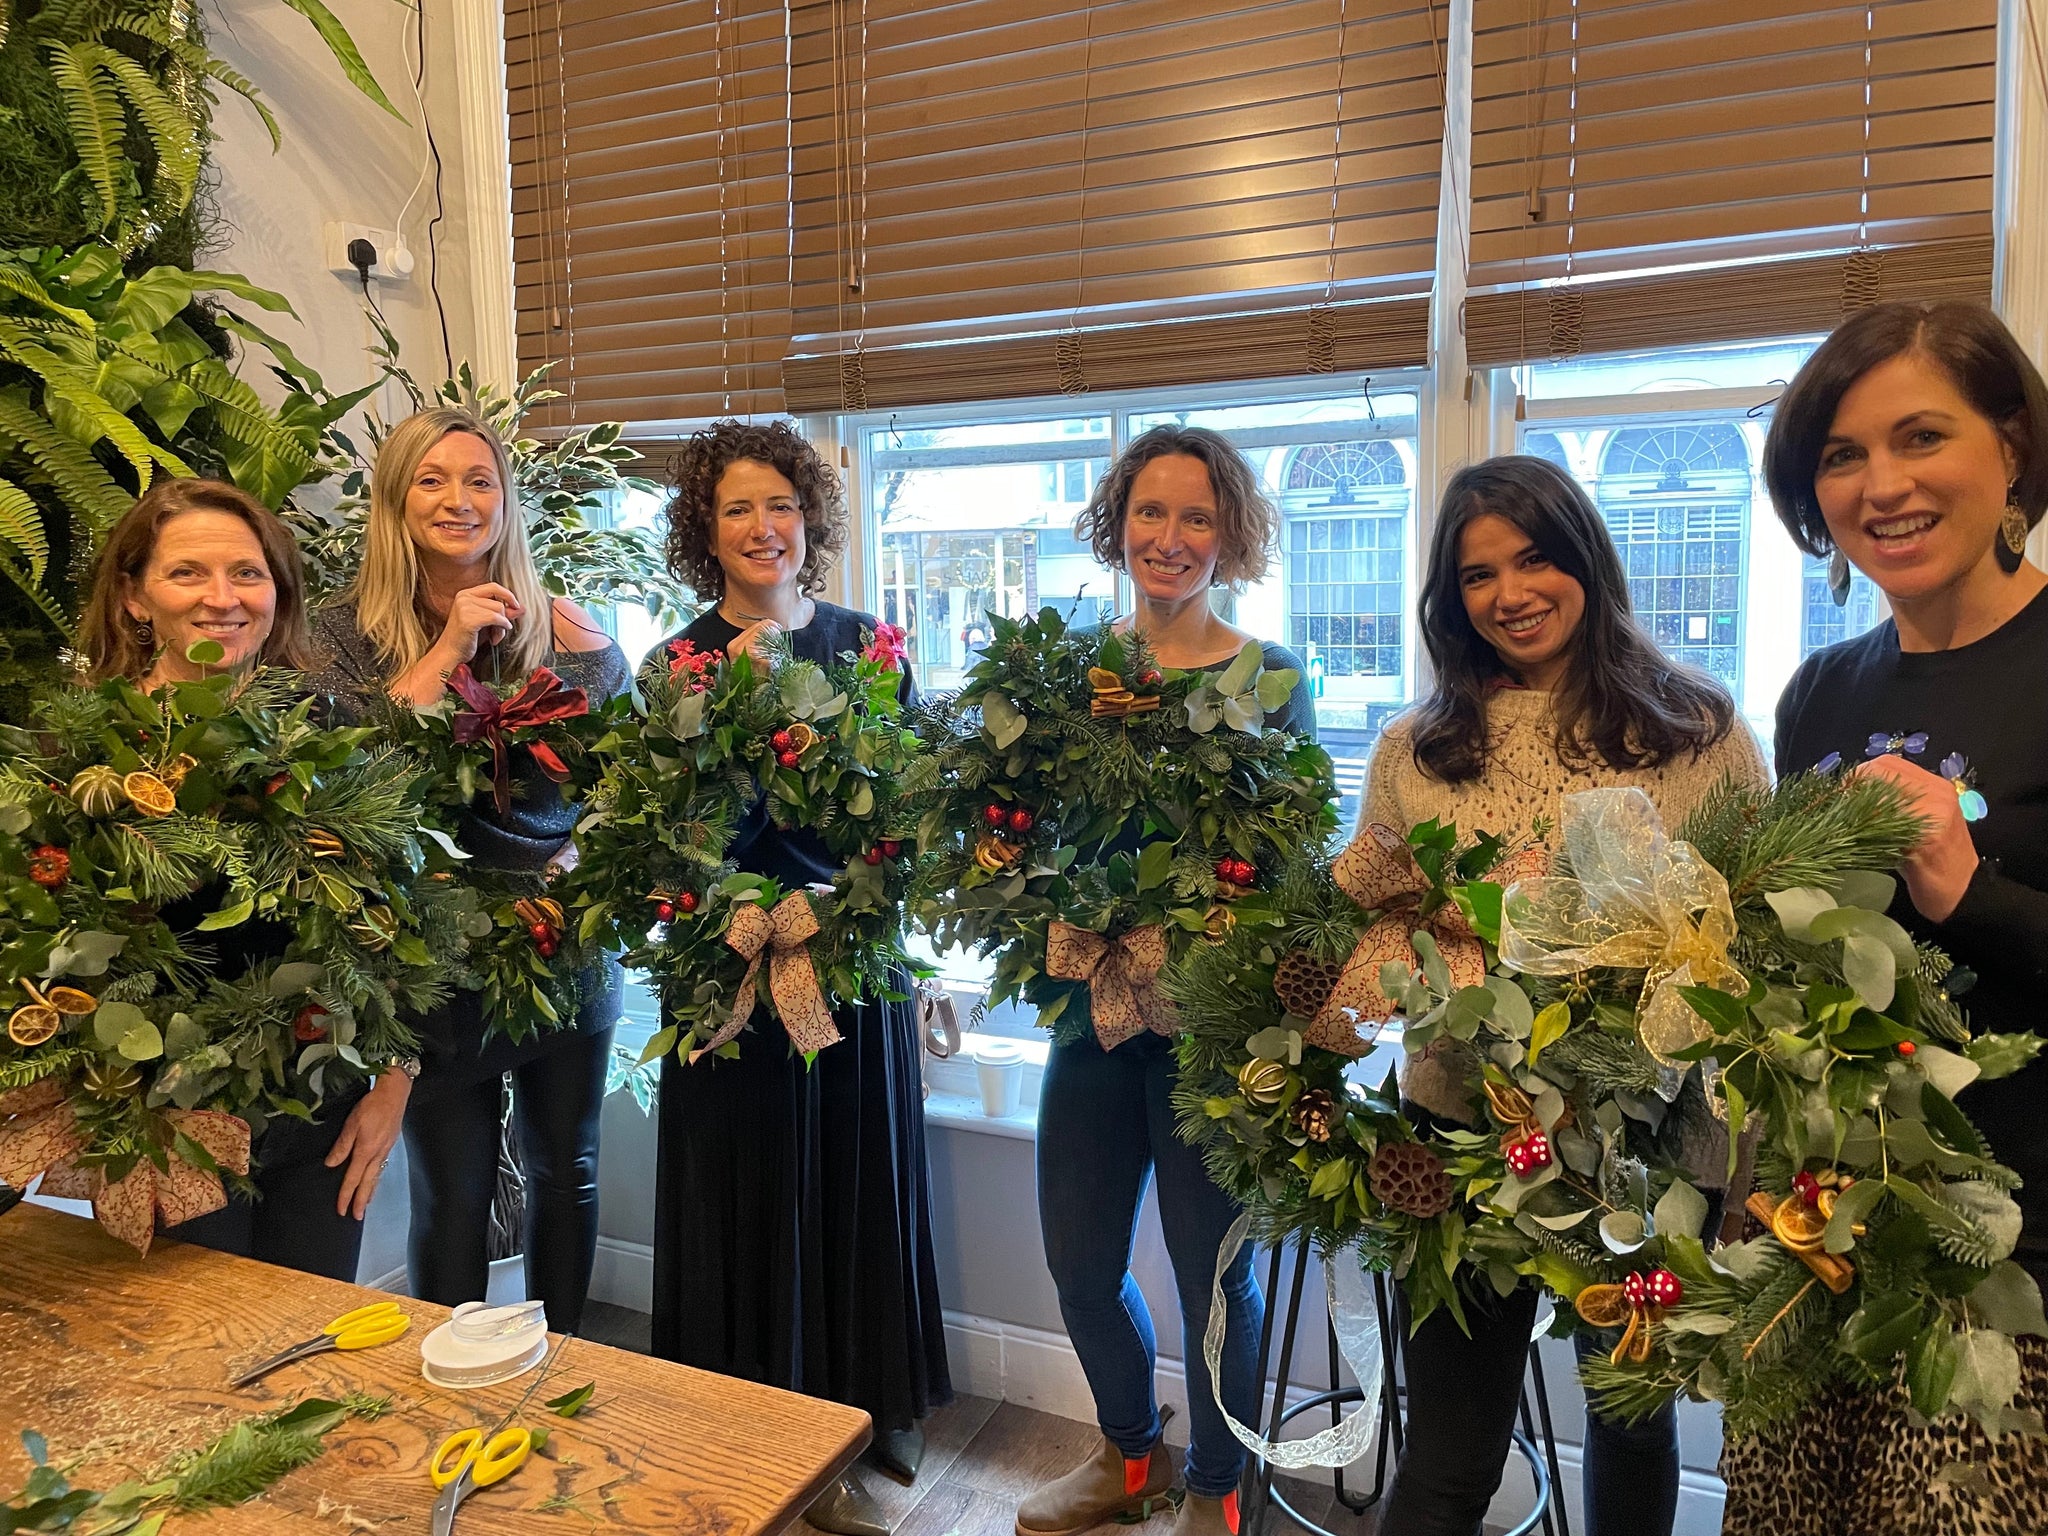 Christmas Wreath Workshop – Friday 1st December, Starting @ 3pm (£75 per person) 2.5 hours